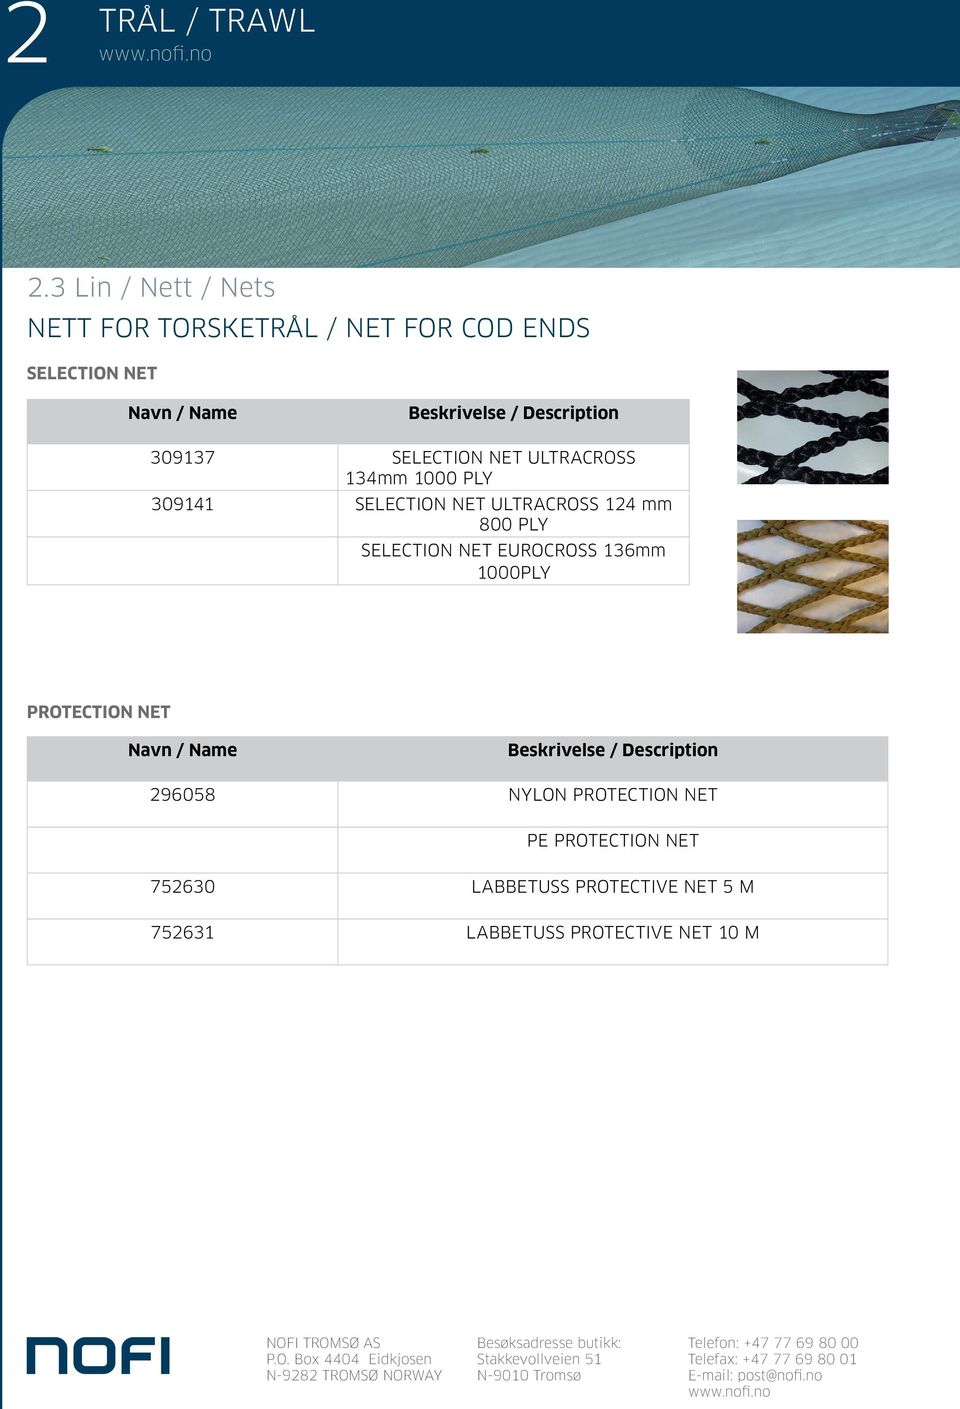 PLY SELECTION NET EUROCROSS 136mm 1000PLY PROTECTION NET 296058 NYLON PROTECTION